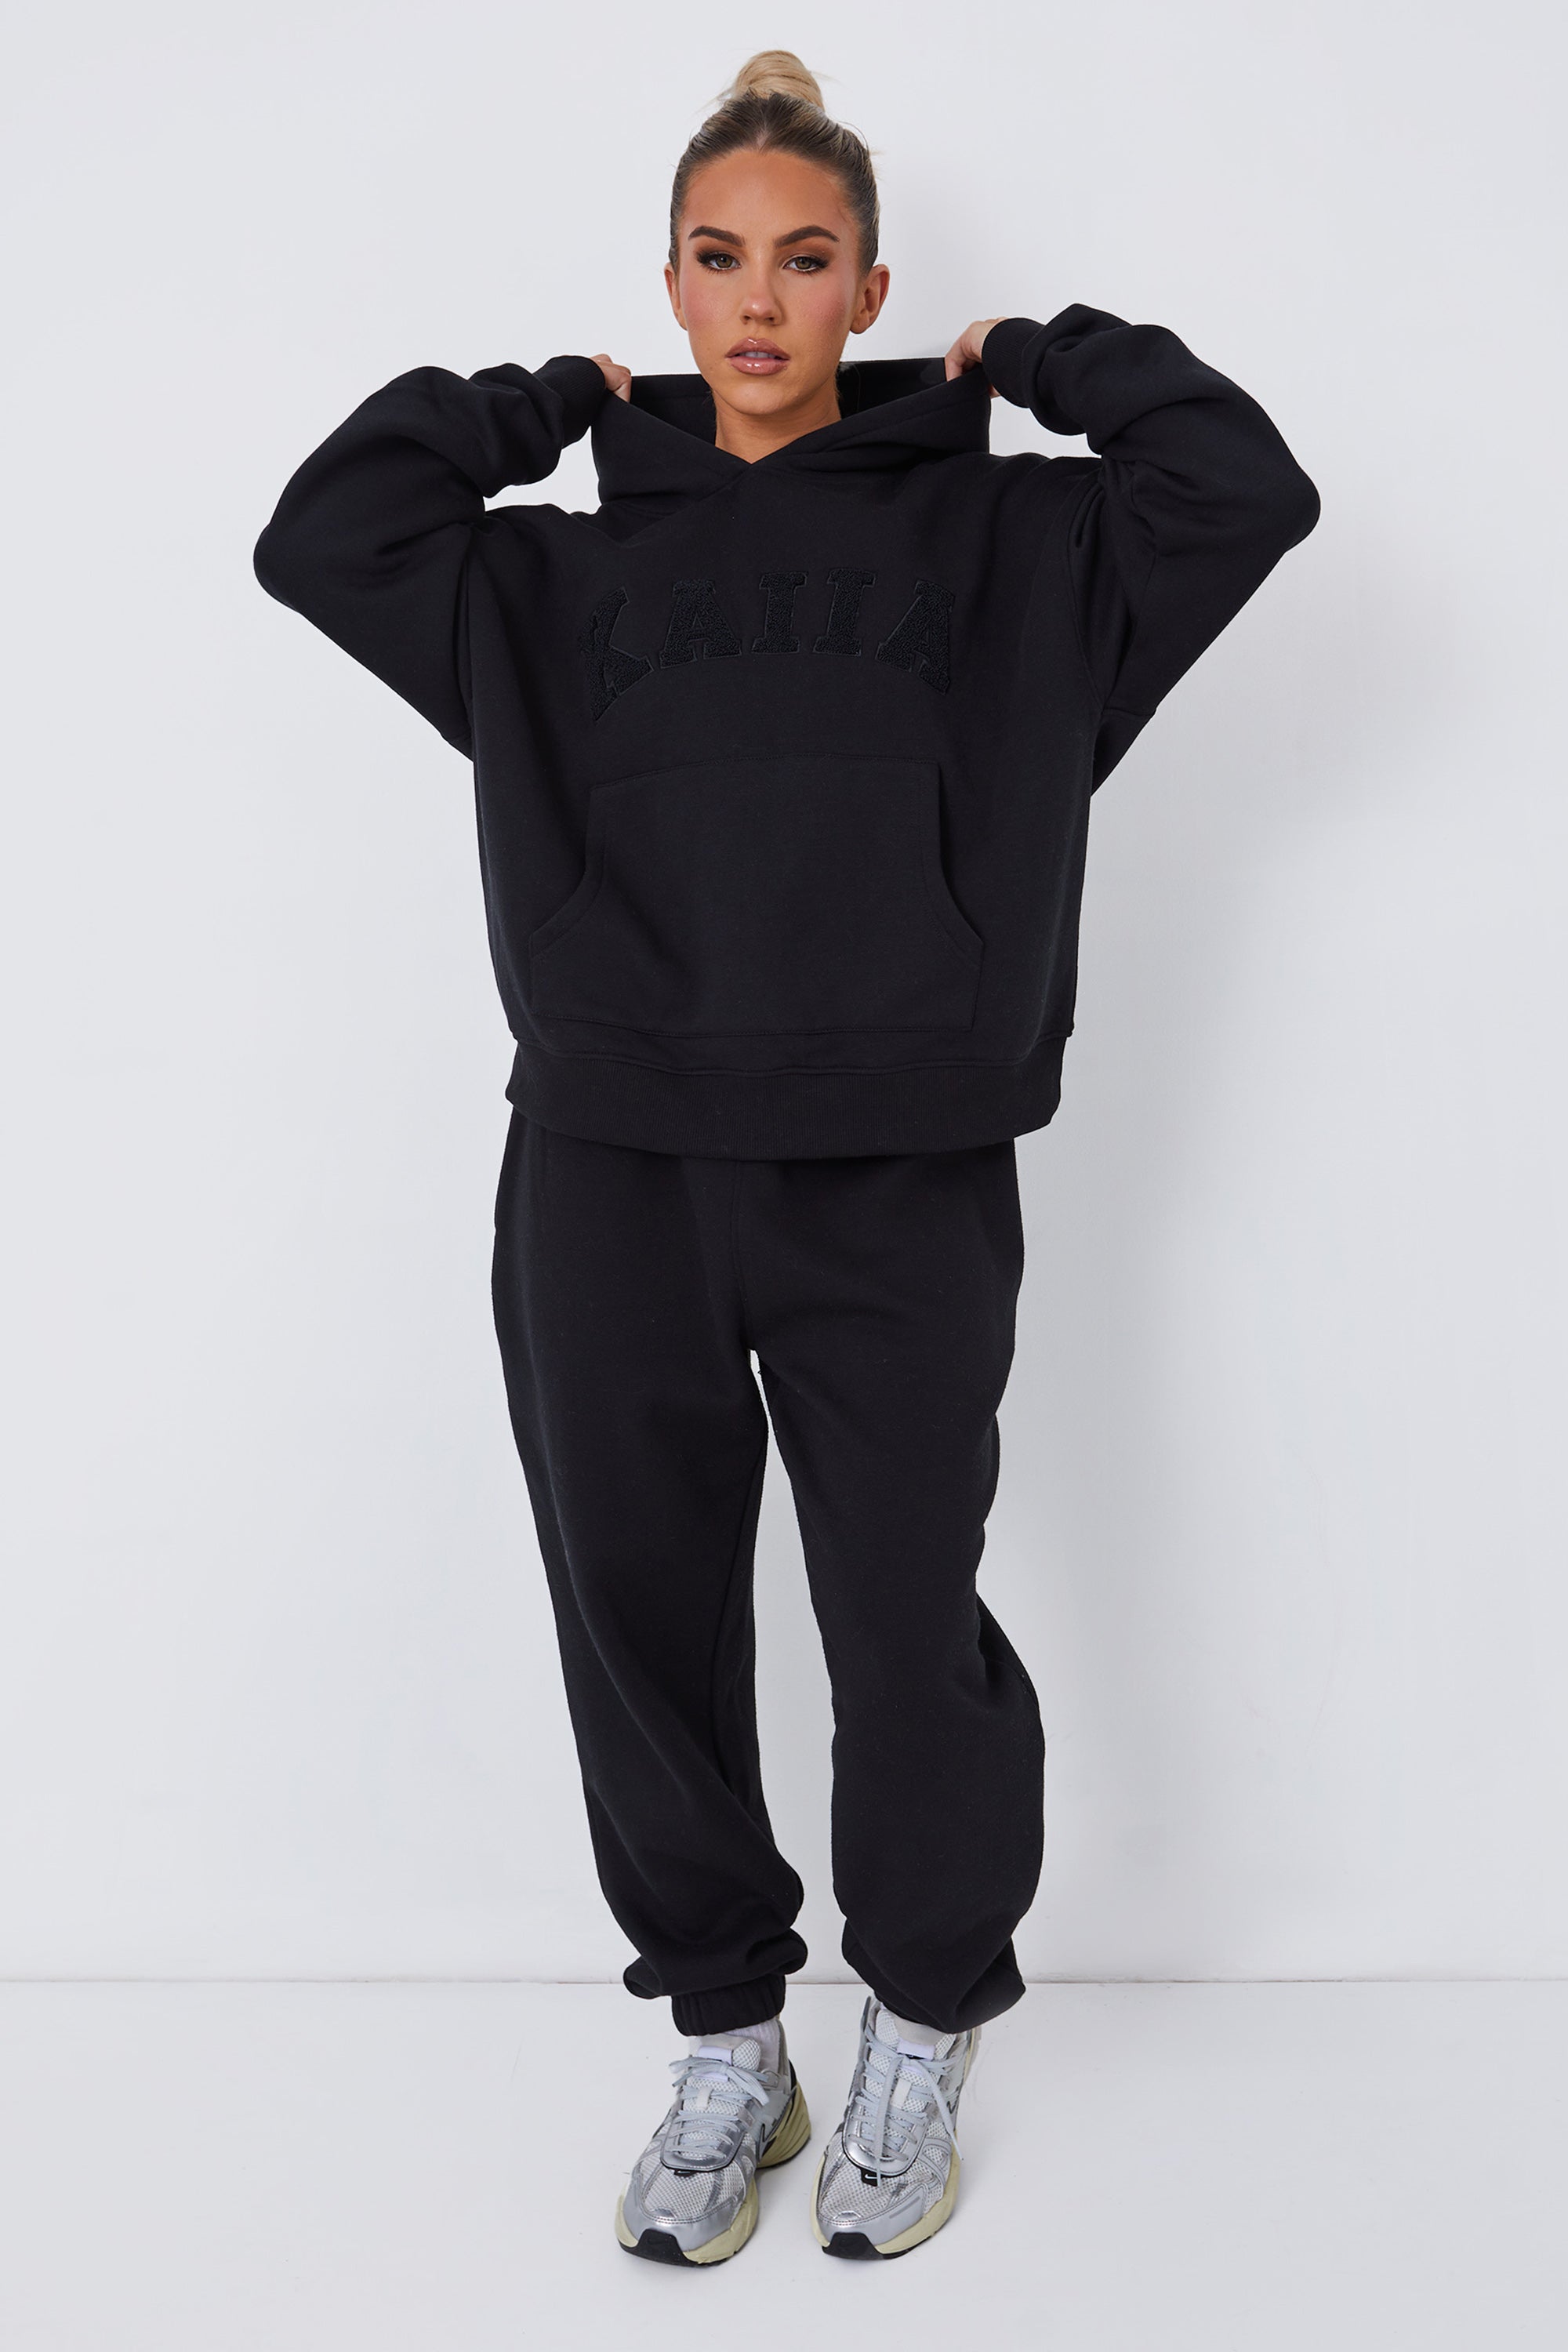 Image of Relaxed Fit Cuffed Jogger Black